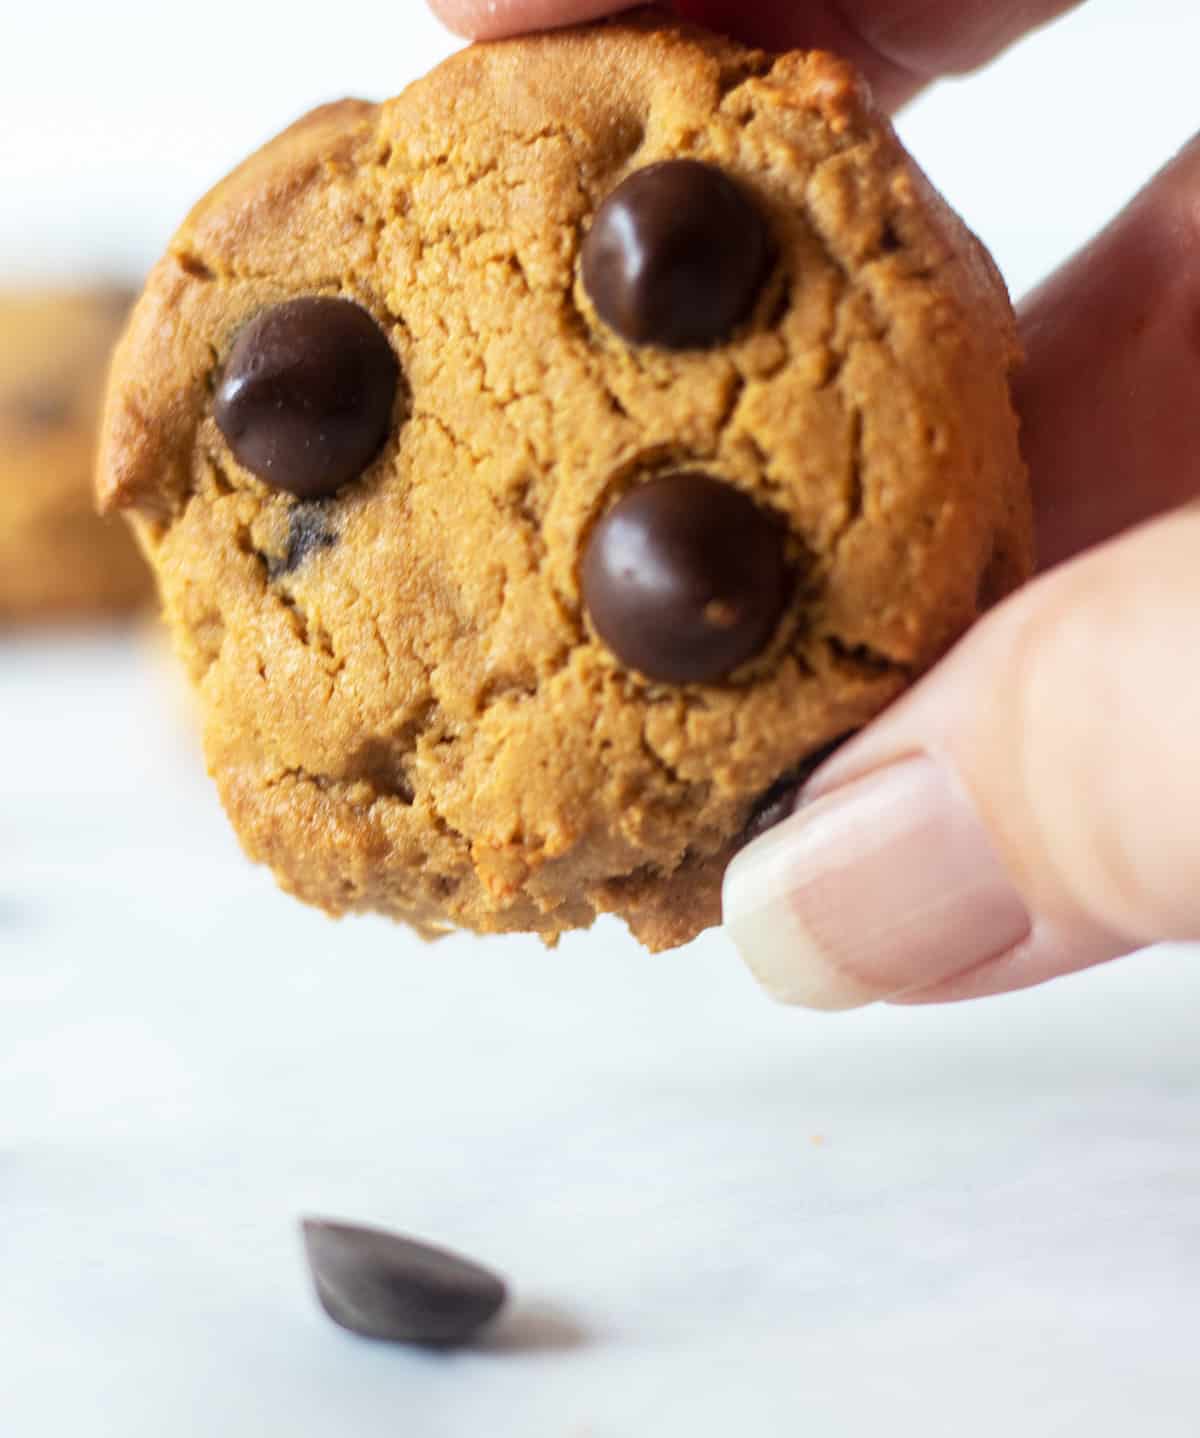 holding a coconut flour chocolate chip cookie in a hand.